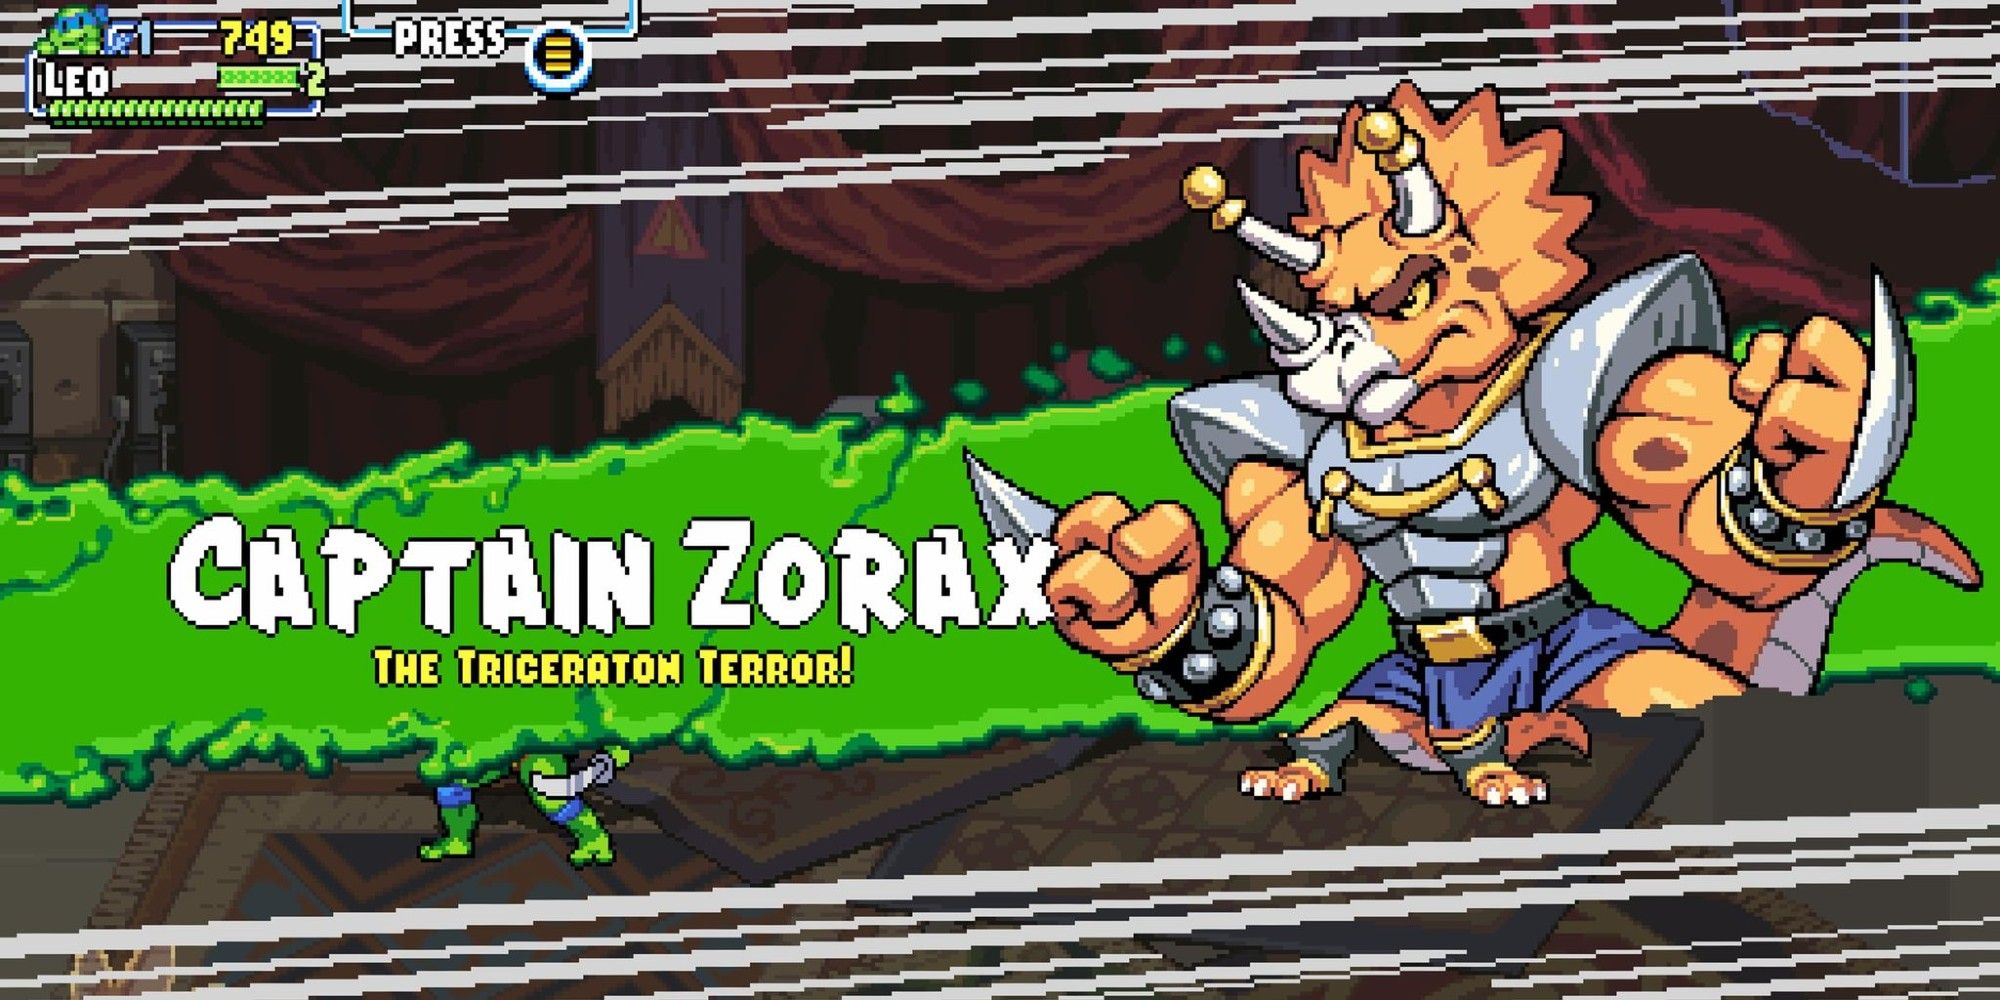 A splash screen for Captain Zorax, The Triceraton Terror, showing an orange triceraton with blades extended